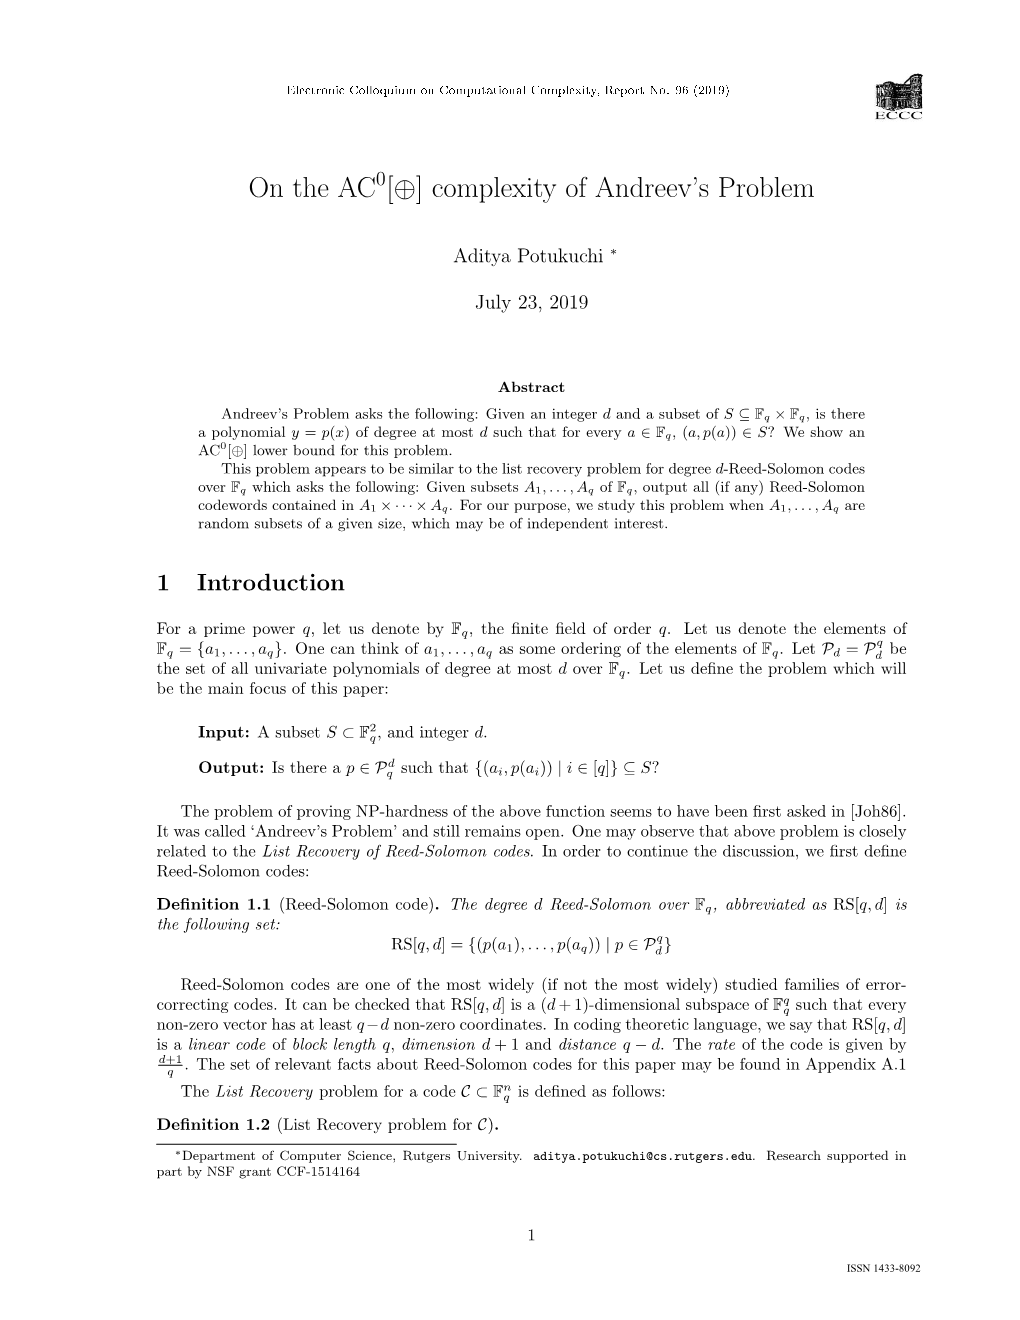 On the AC [+] Complexity of Andreev's Problem